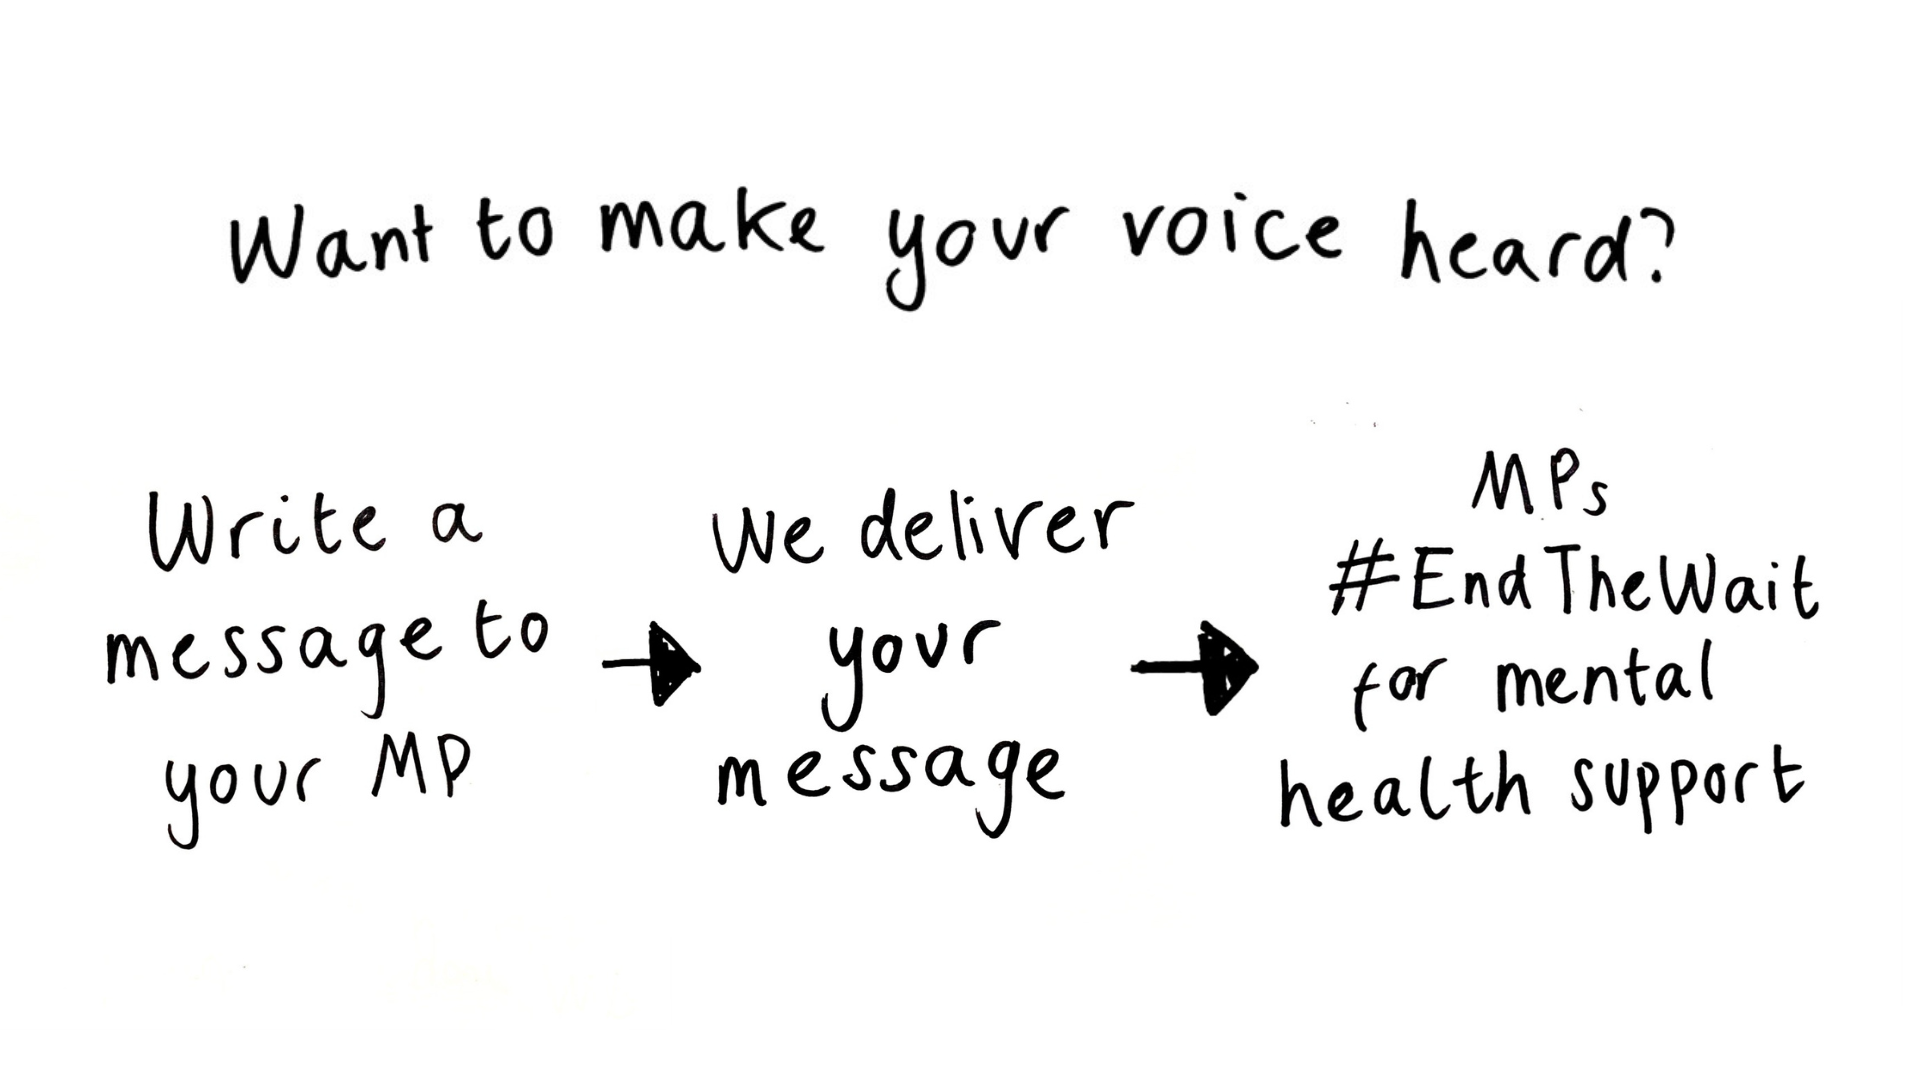 Text reading: "Want to make your voice heard? Write a message to your MP. We deliver your message. MPs #EndTheWait for mental health support."